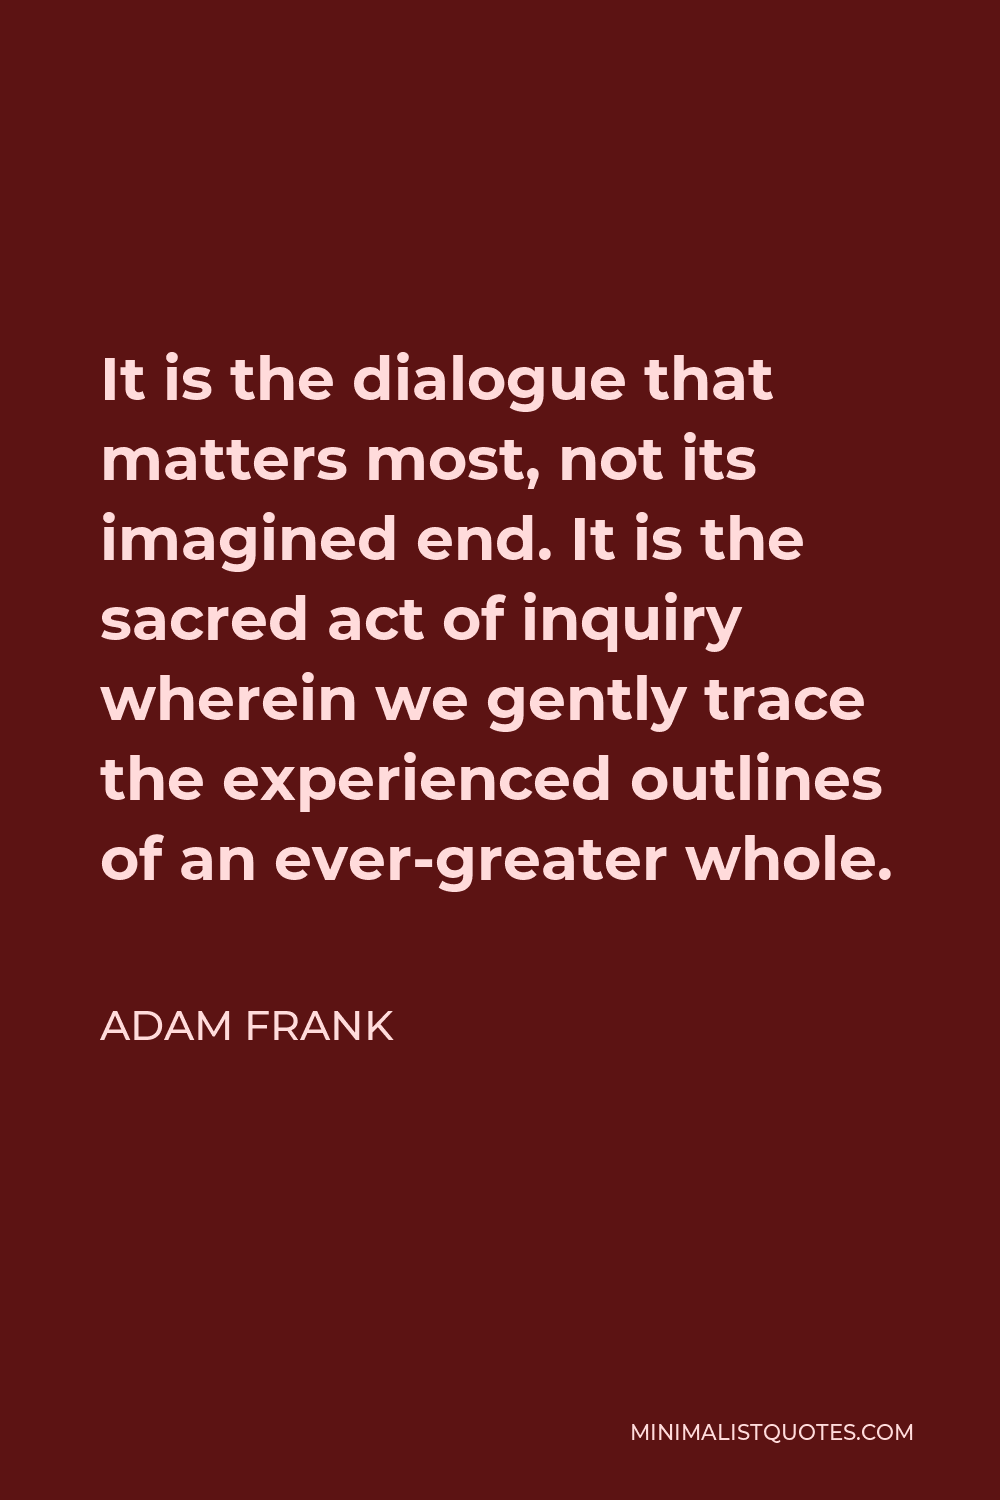 Adam Frank Quote - It is the dialogue that matters most, not its imagined end. It is the sacred act of inquiry wherein we gently trace the experienced outlines of an ever-greater whole.